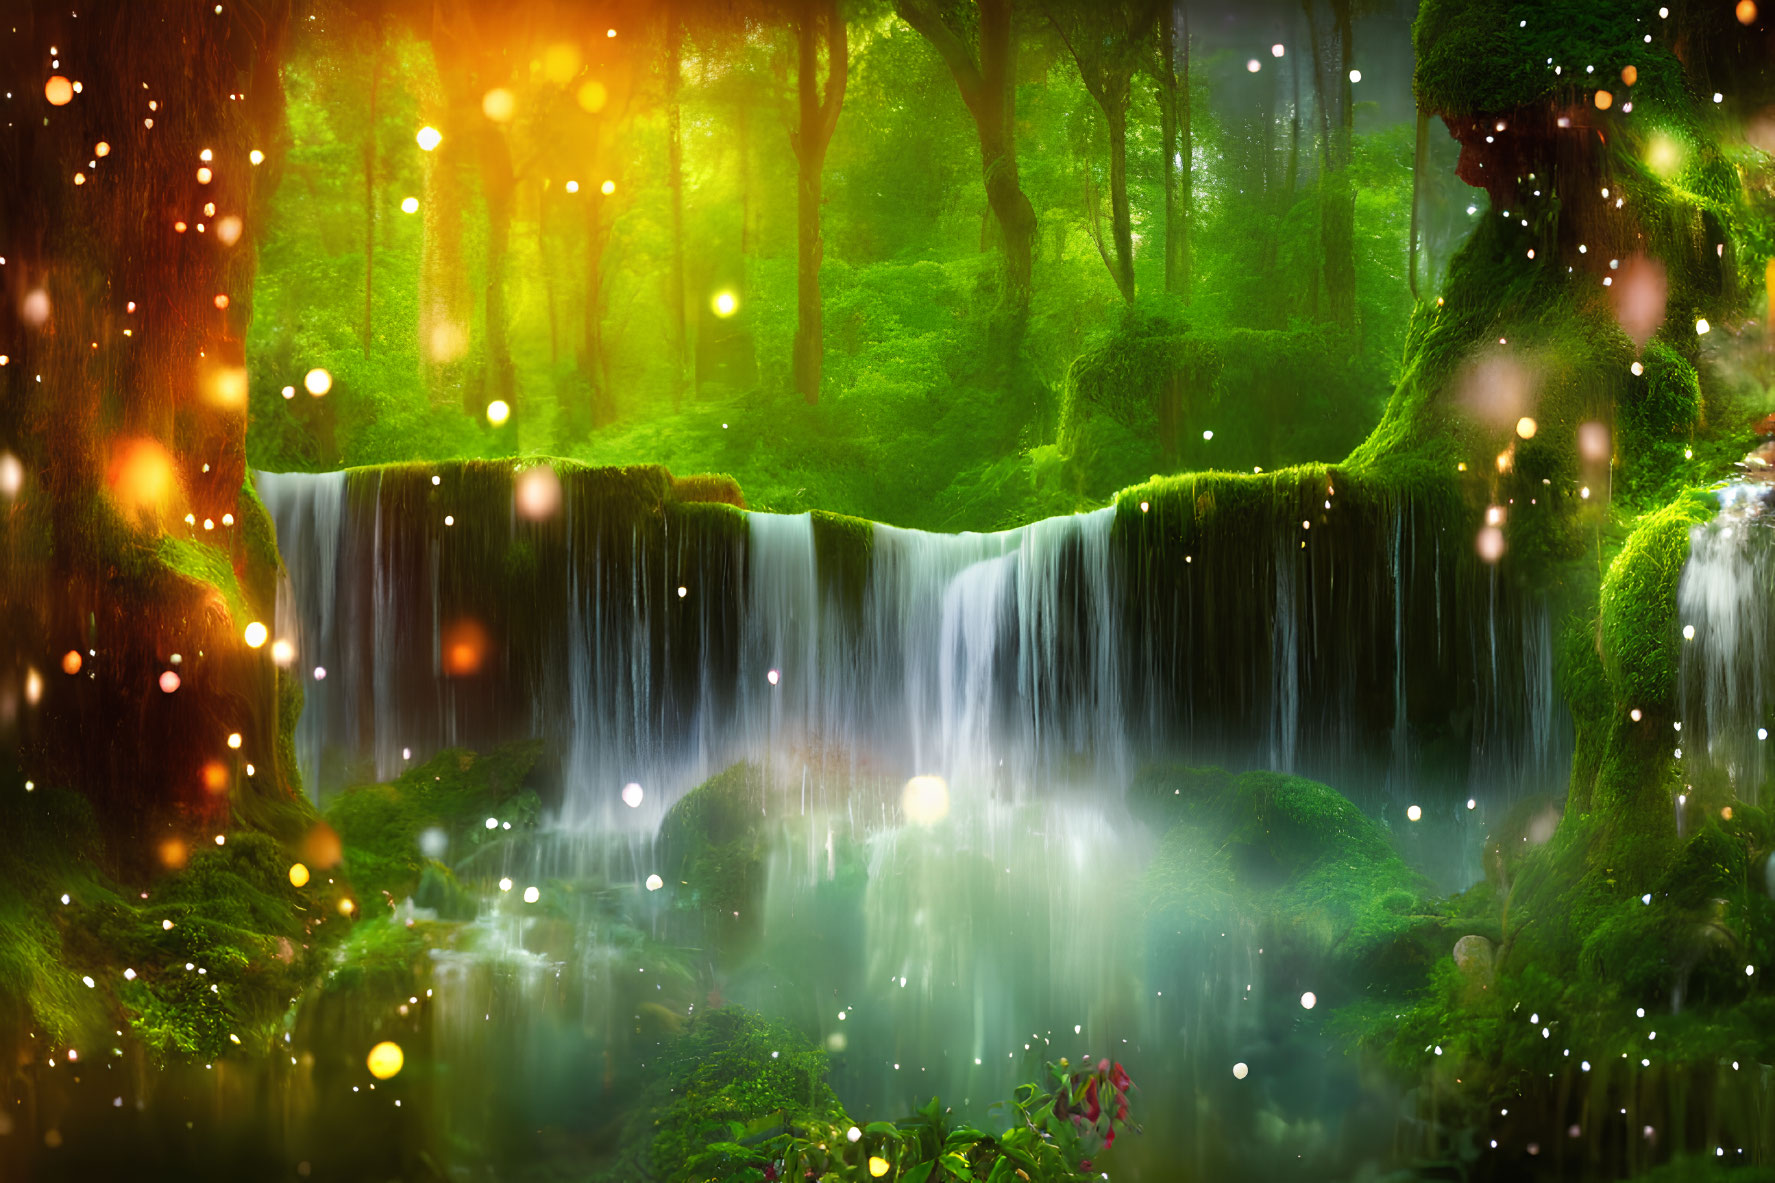 Serene Waterfall in Enchanted Green Forest